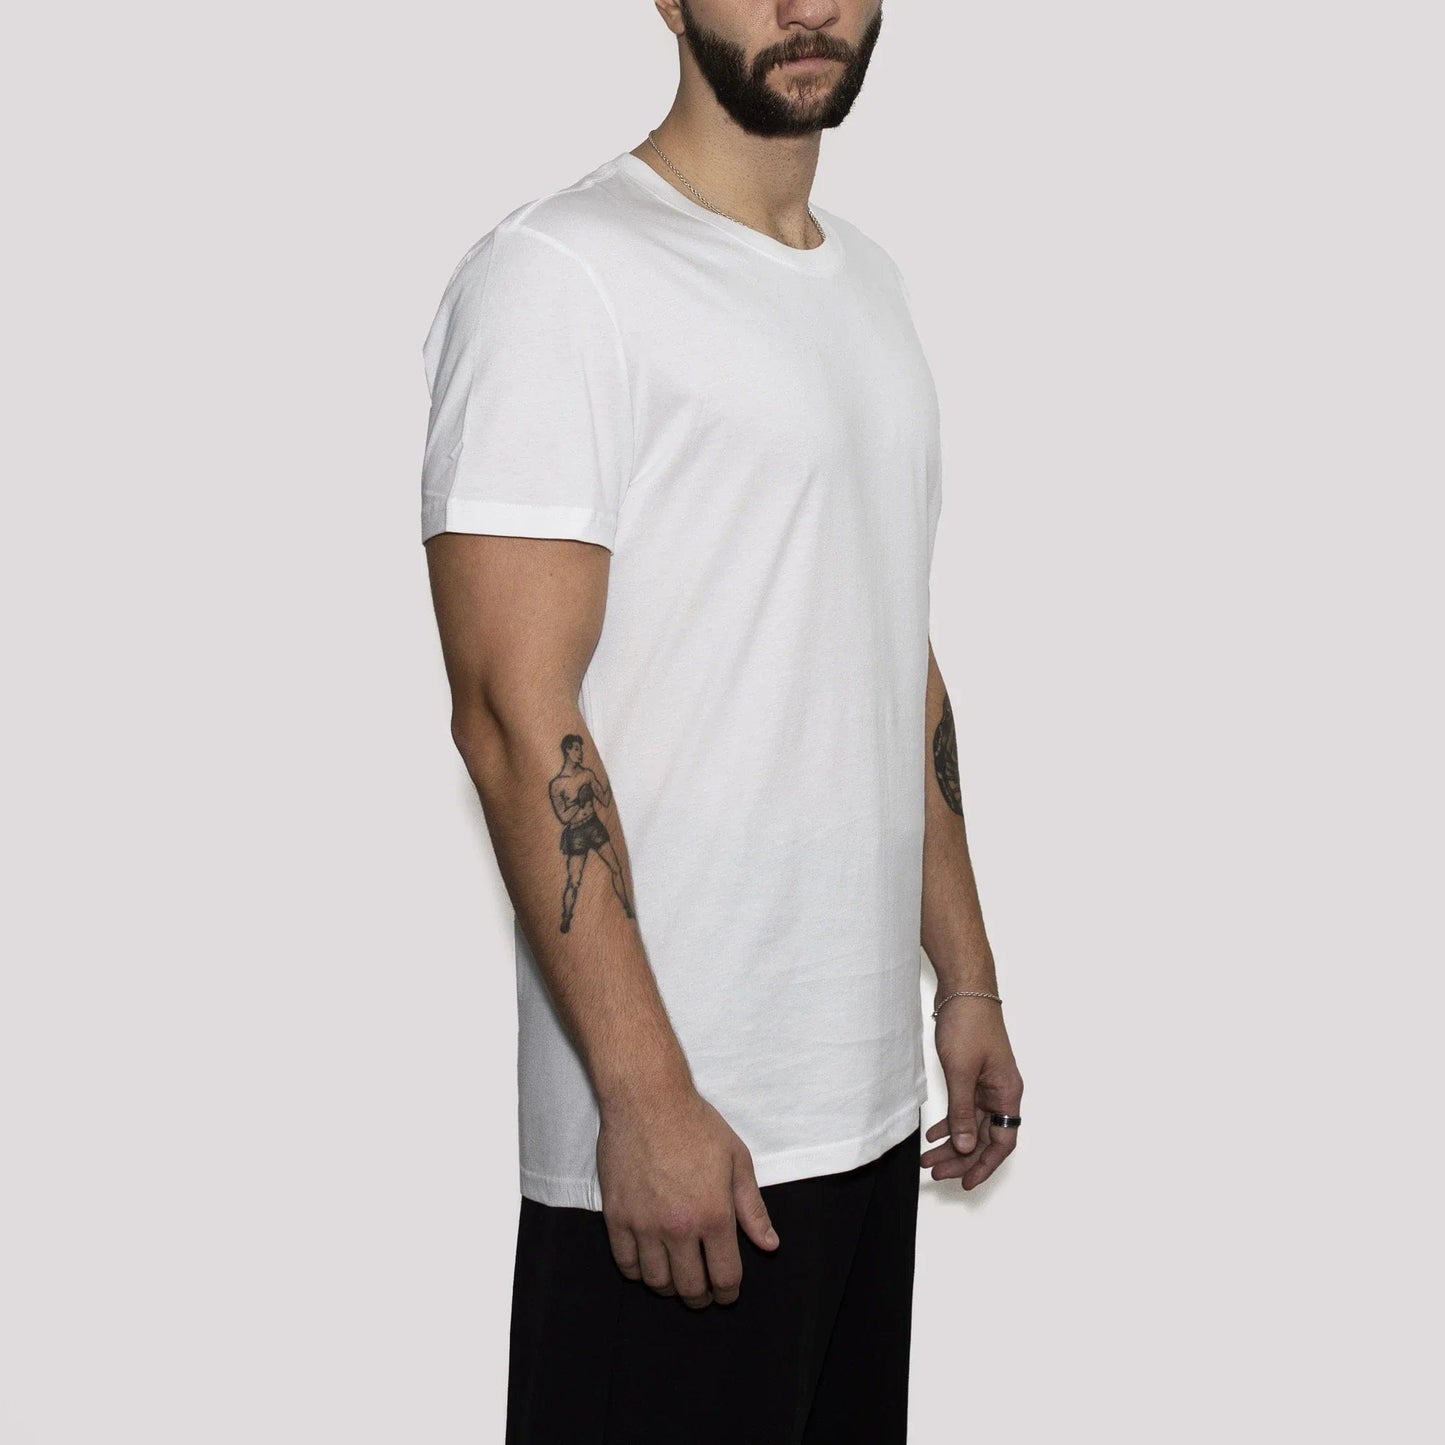 Men’s Recycled Cotton T-Shirt, White